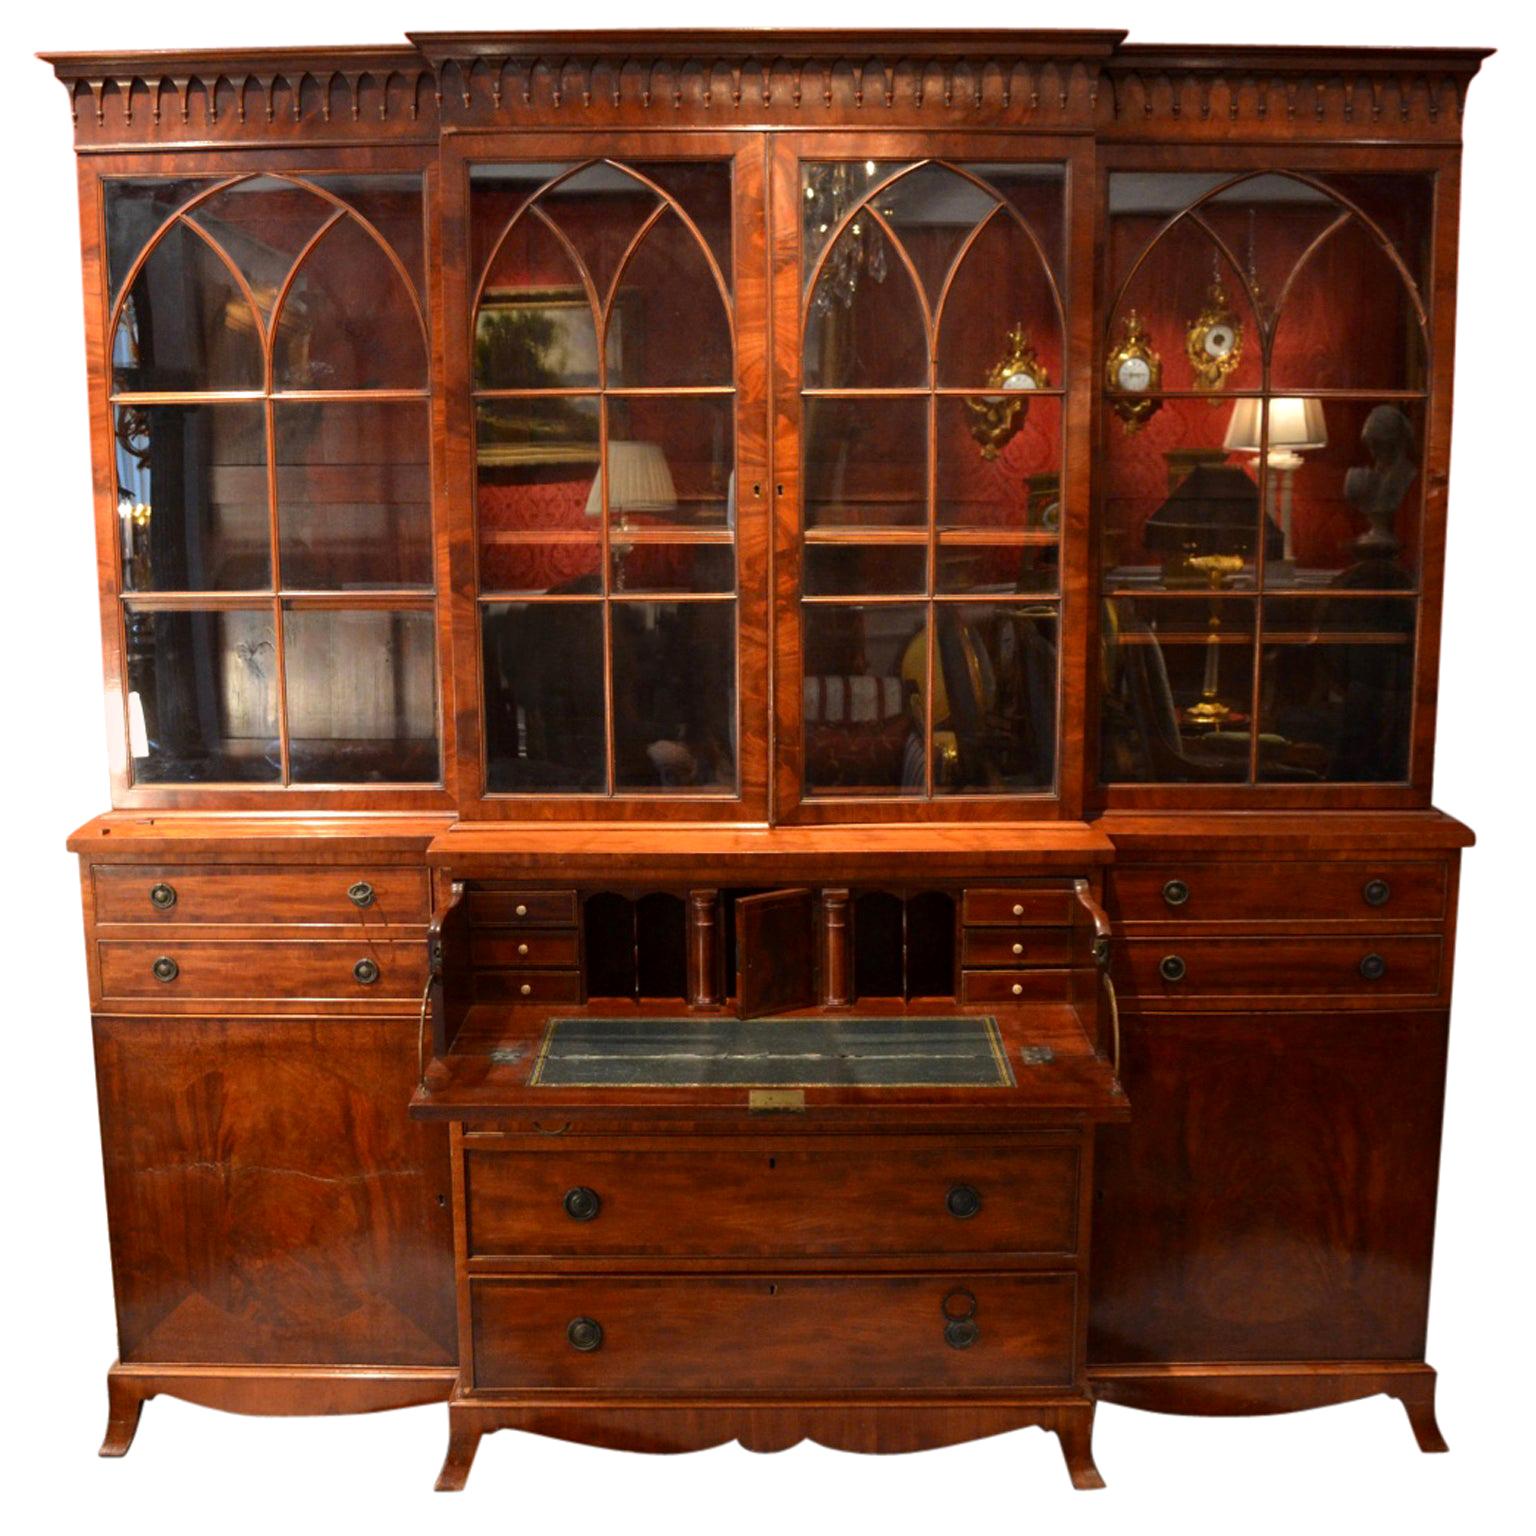 Late George iv English Mahogany Breakfront Bookcase/ Desk/ Chest of Drawers